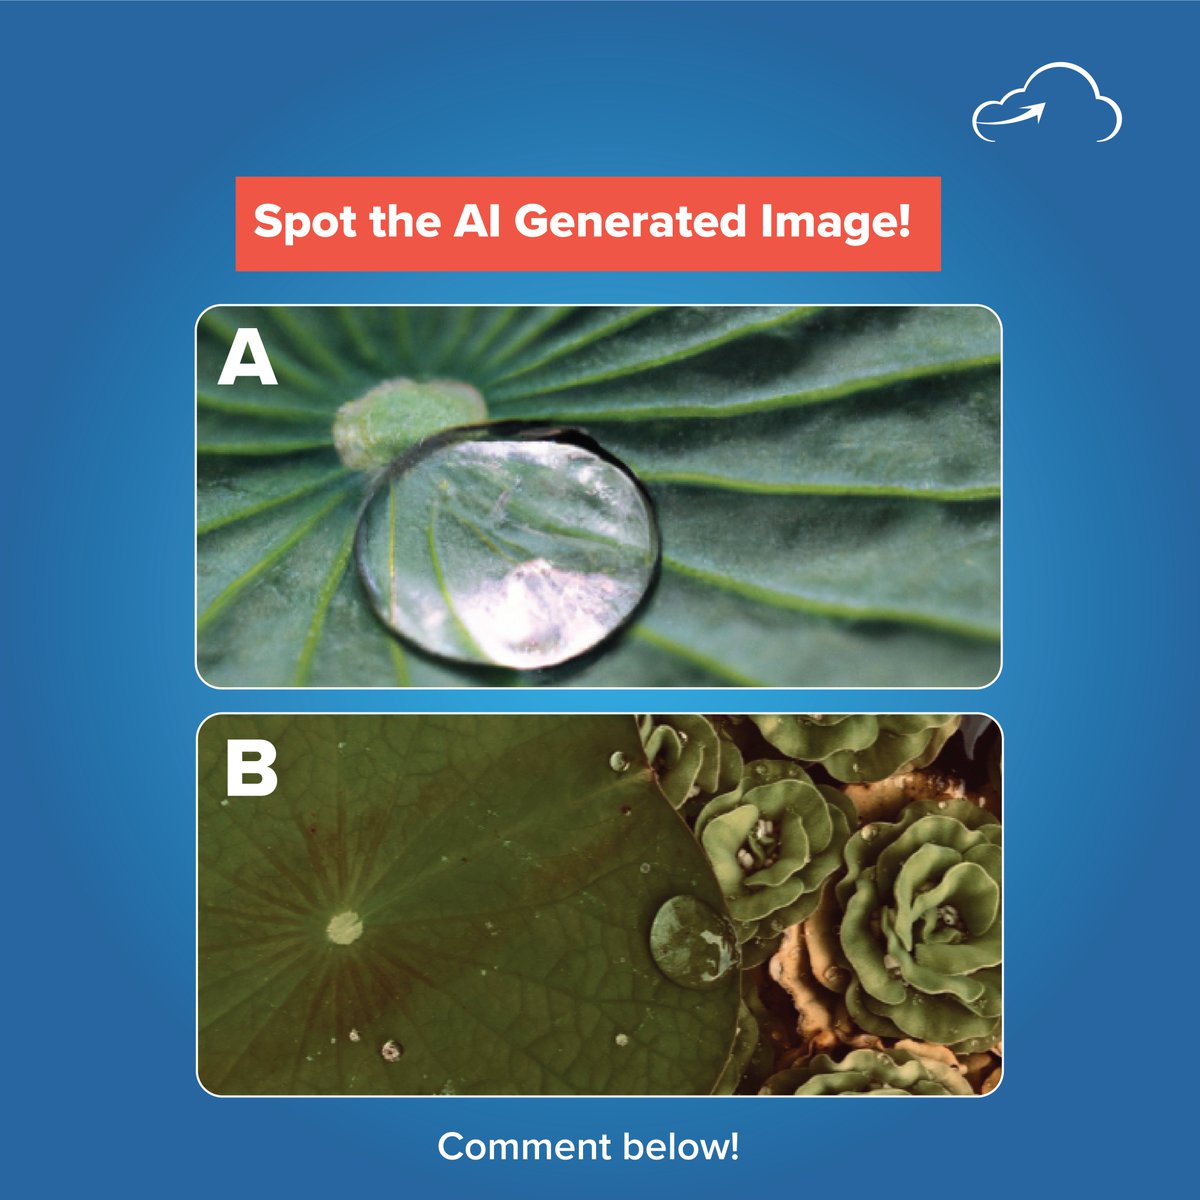 Here is the second Image! Put on your detective goggles and spot the AI generated image! Comment with your answer, option A, option B. Act quickly! The competition is growing fiercer with each passing moment!

#PerceptionChallenge #AIvsHuman #SpotTheReal #VisualAcumen…